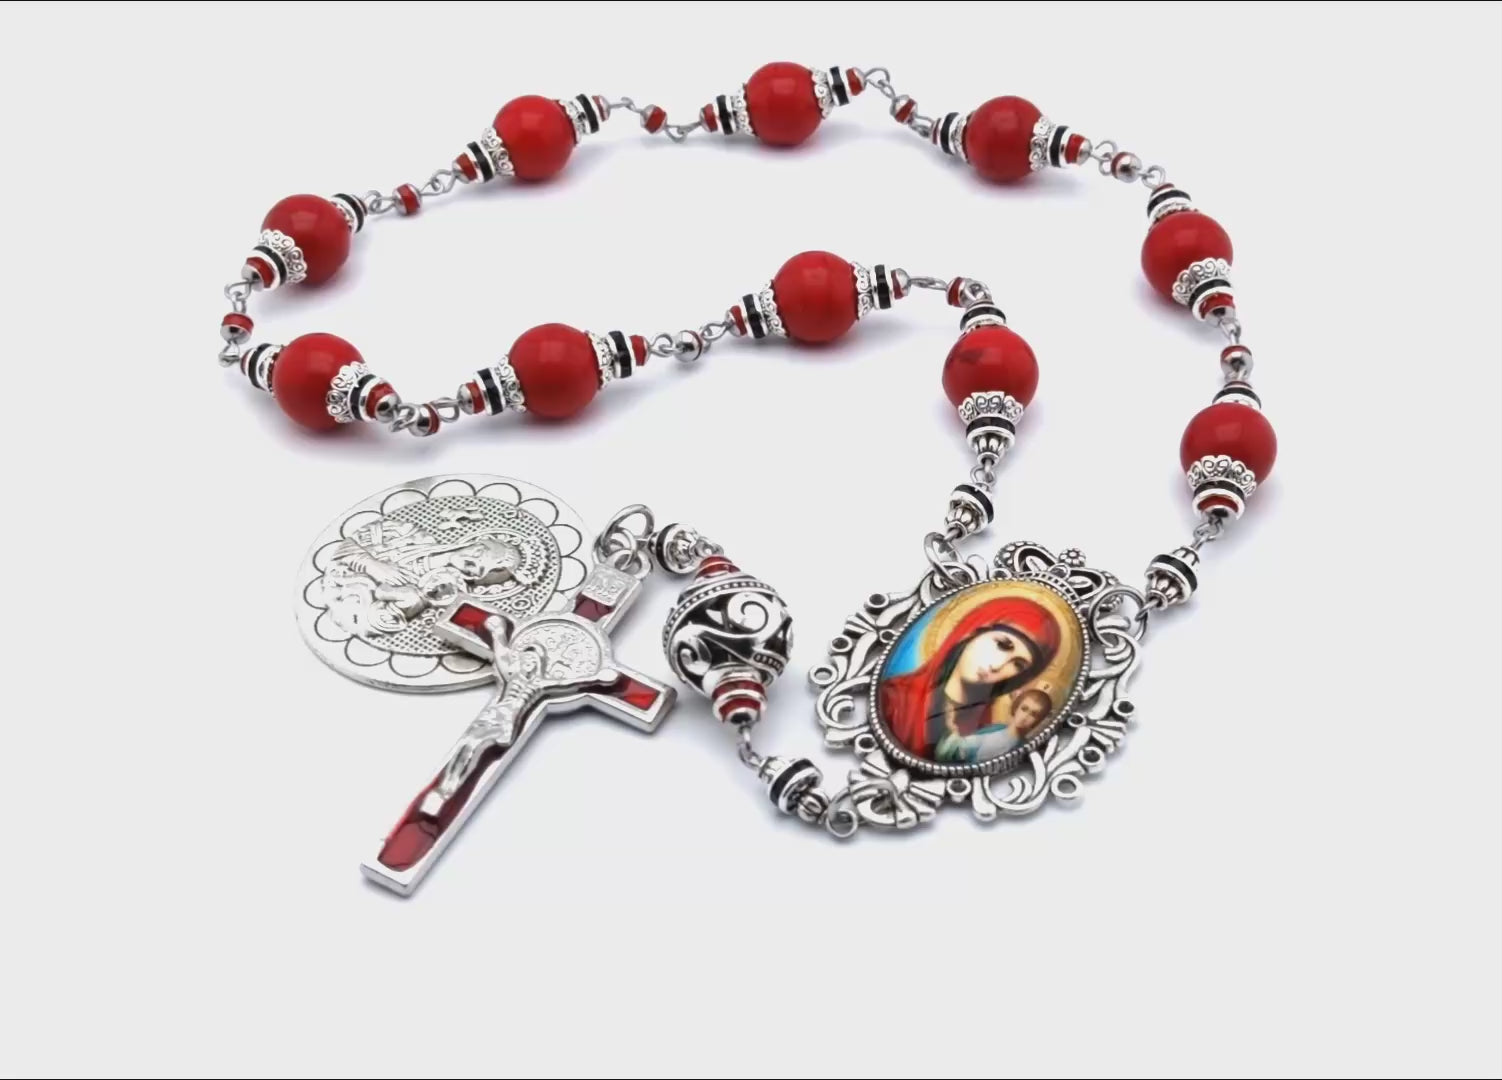 Our Lady of Perpetual Succor unique rosary beads with red gemstone beads, silver and red enamel crucifix and picture centre medal.